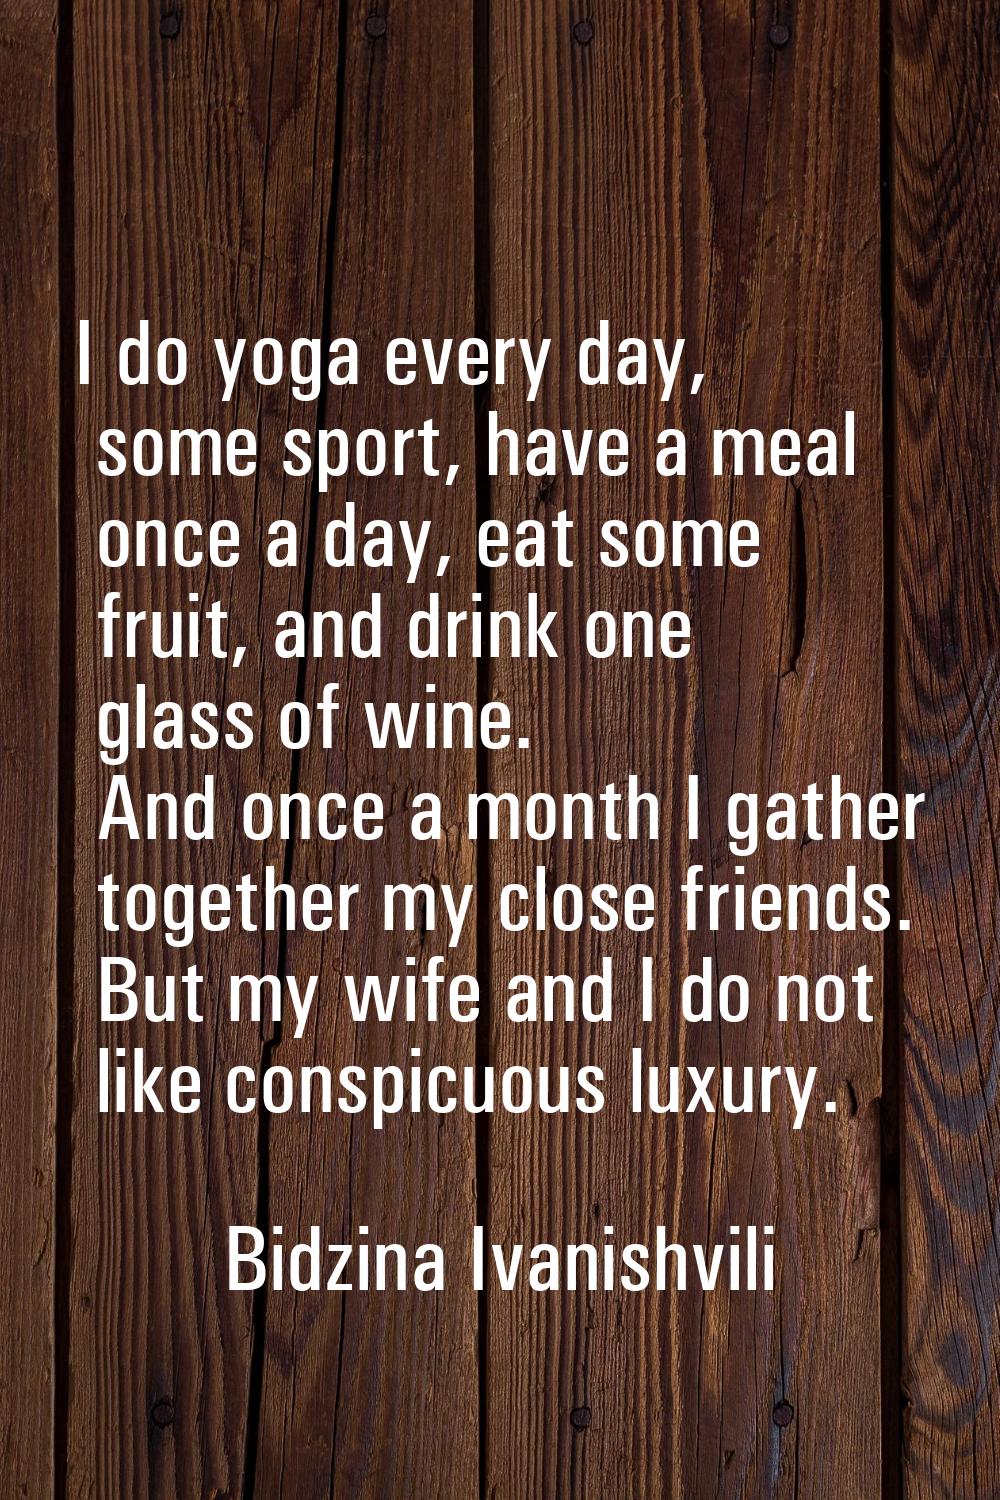 I do yoga every day, some sport, have a meal once a day, eat some fruit, and drink one glass of win